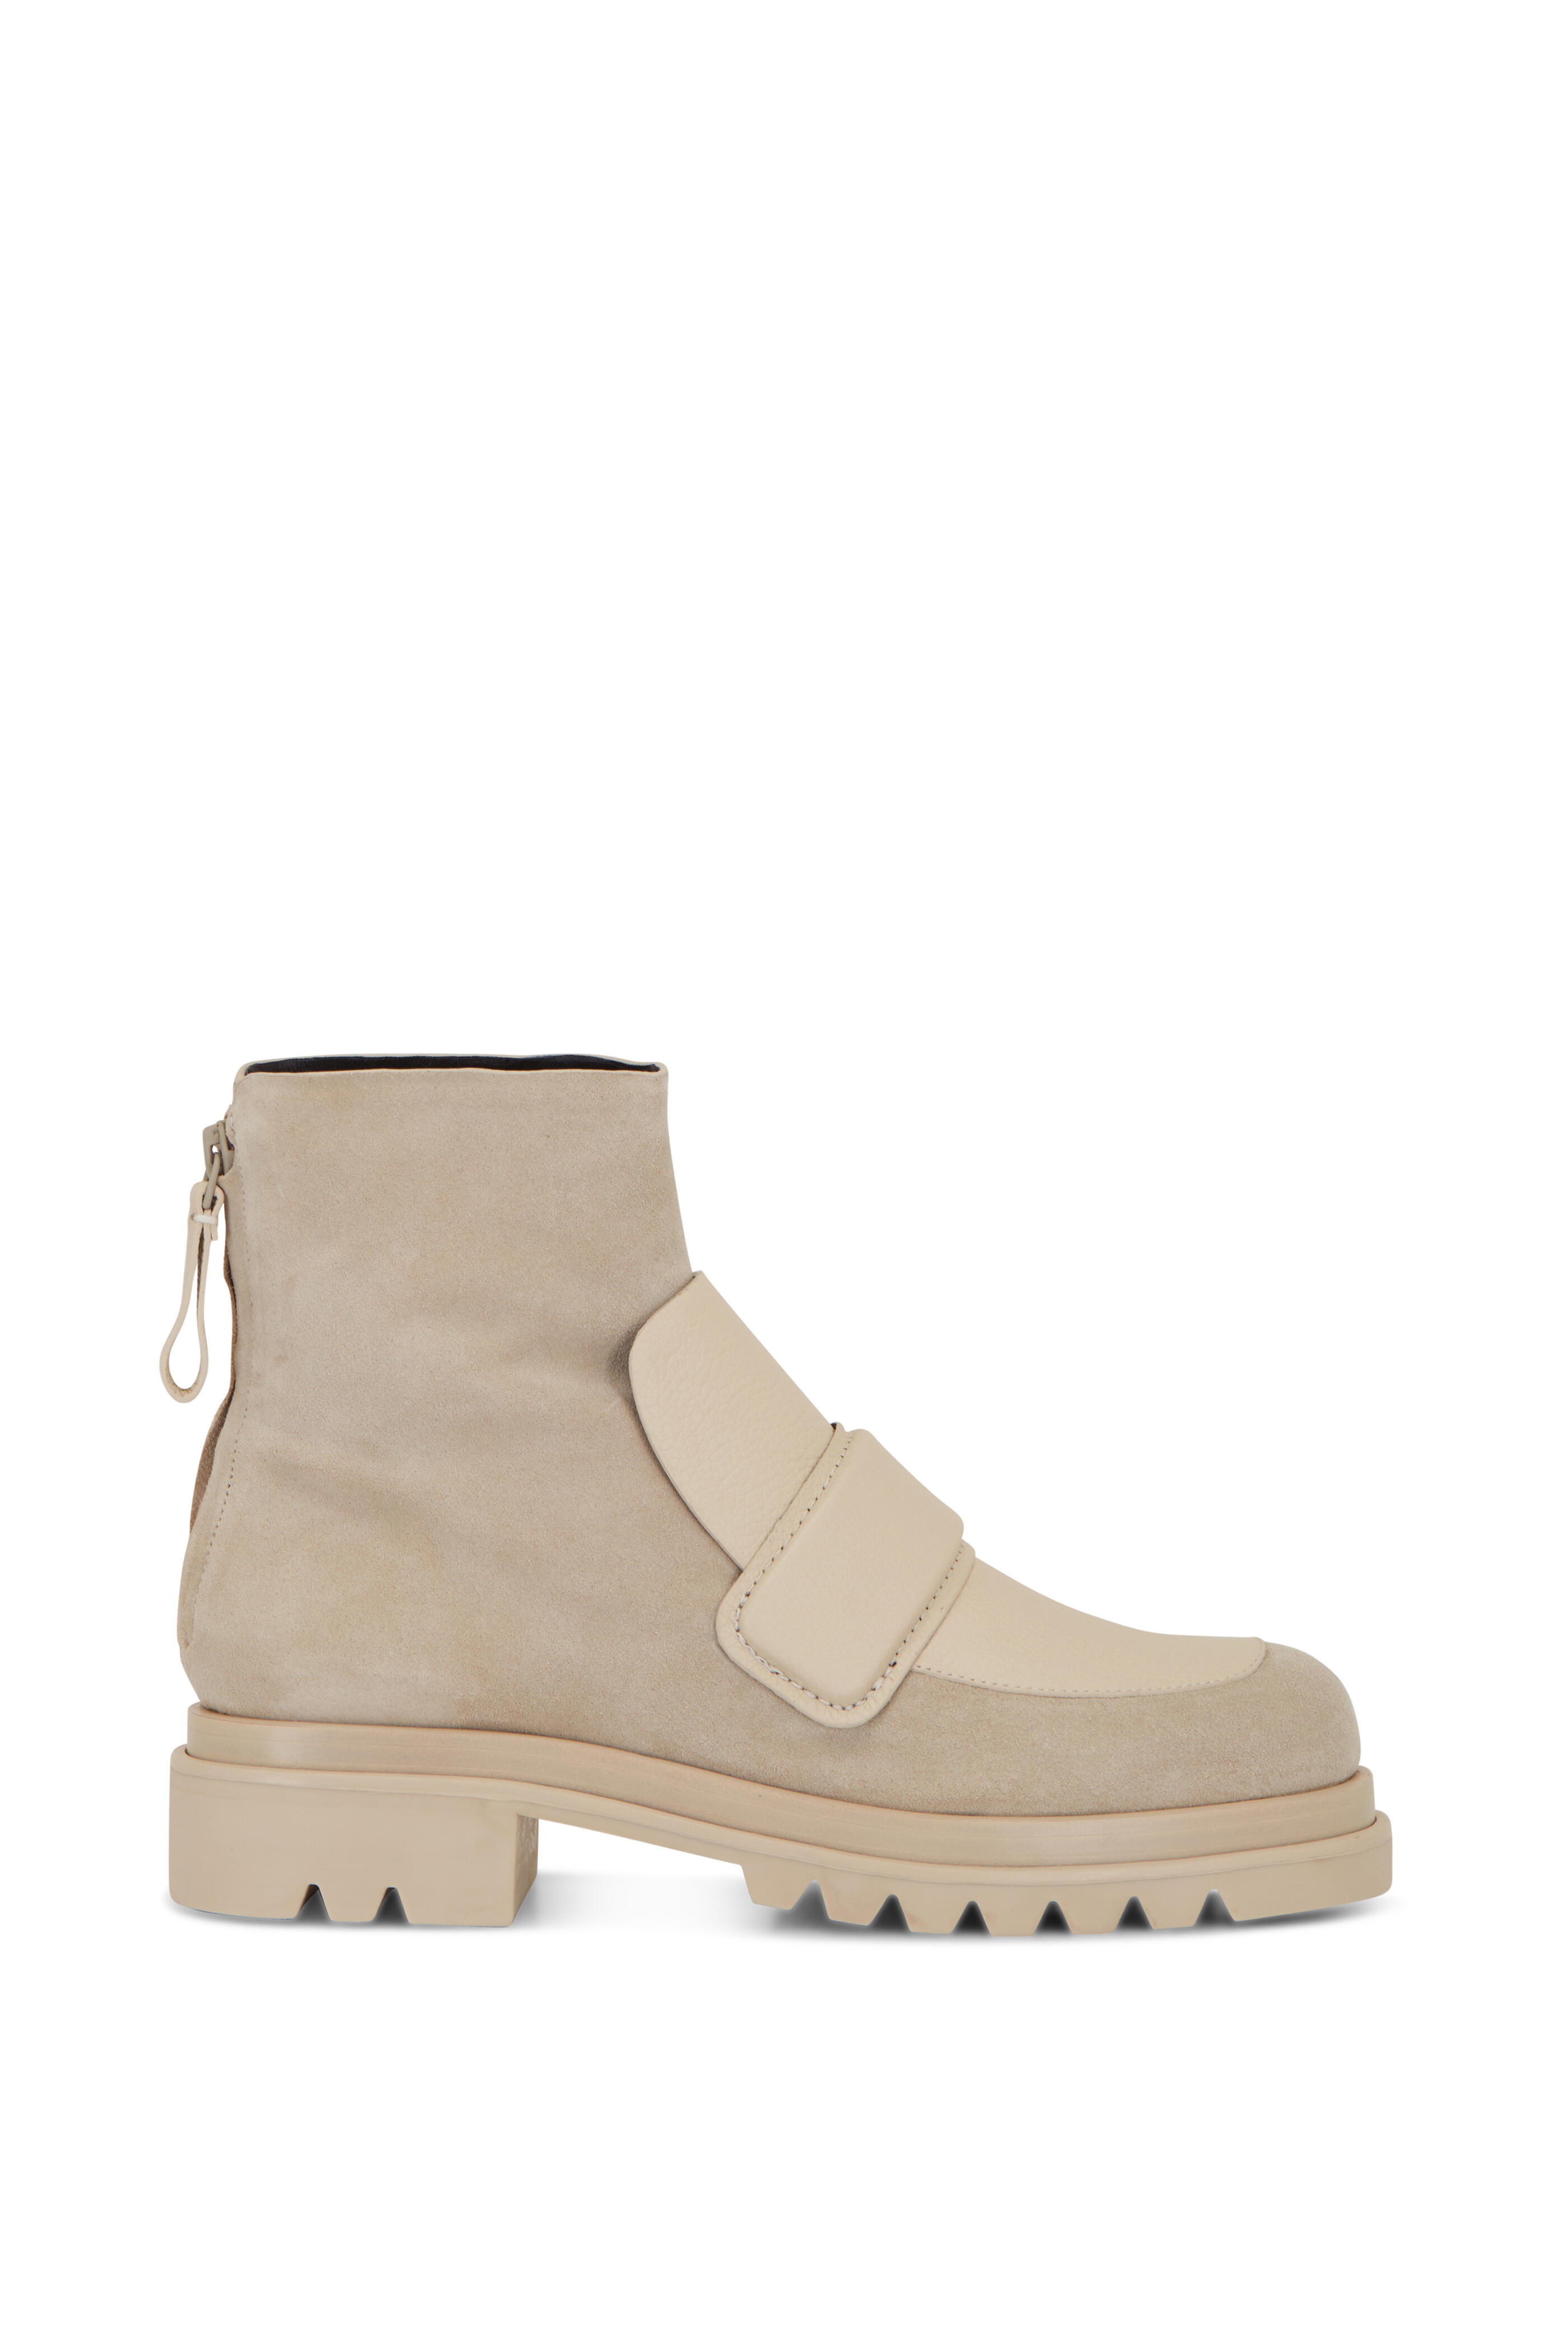 Mercedes Castillo - Dylan Wheat Suede Lug Sole Boot